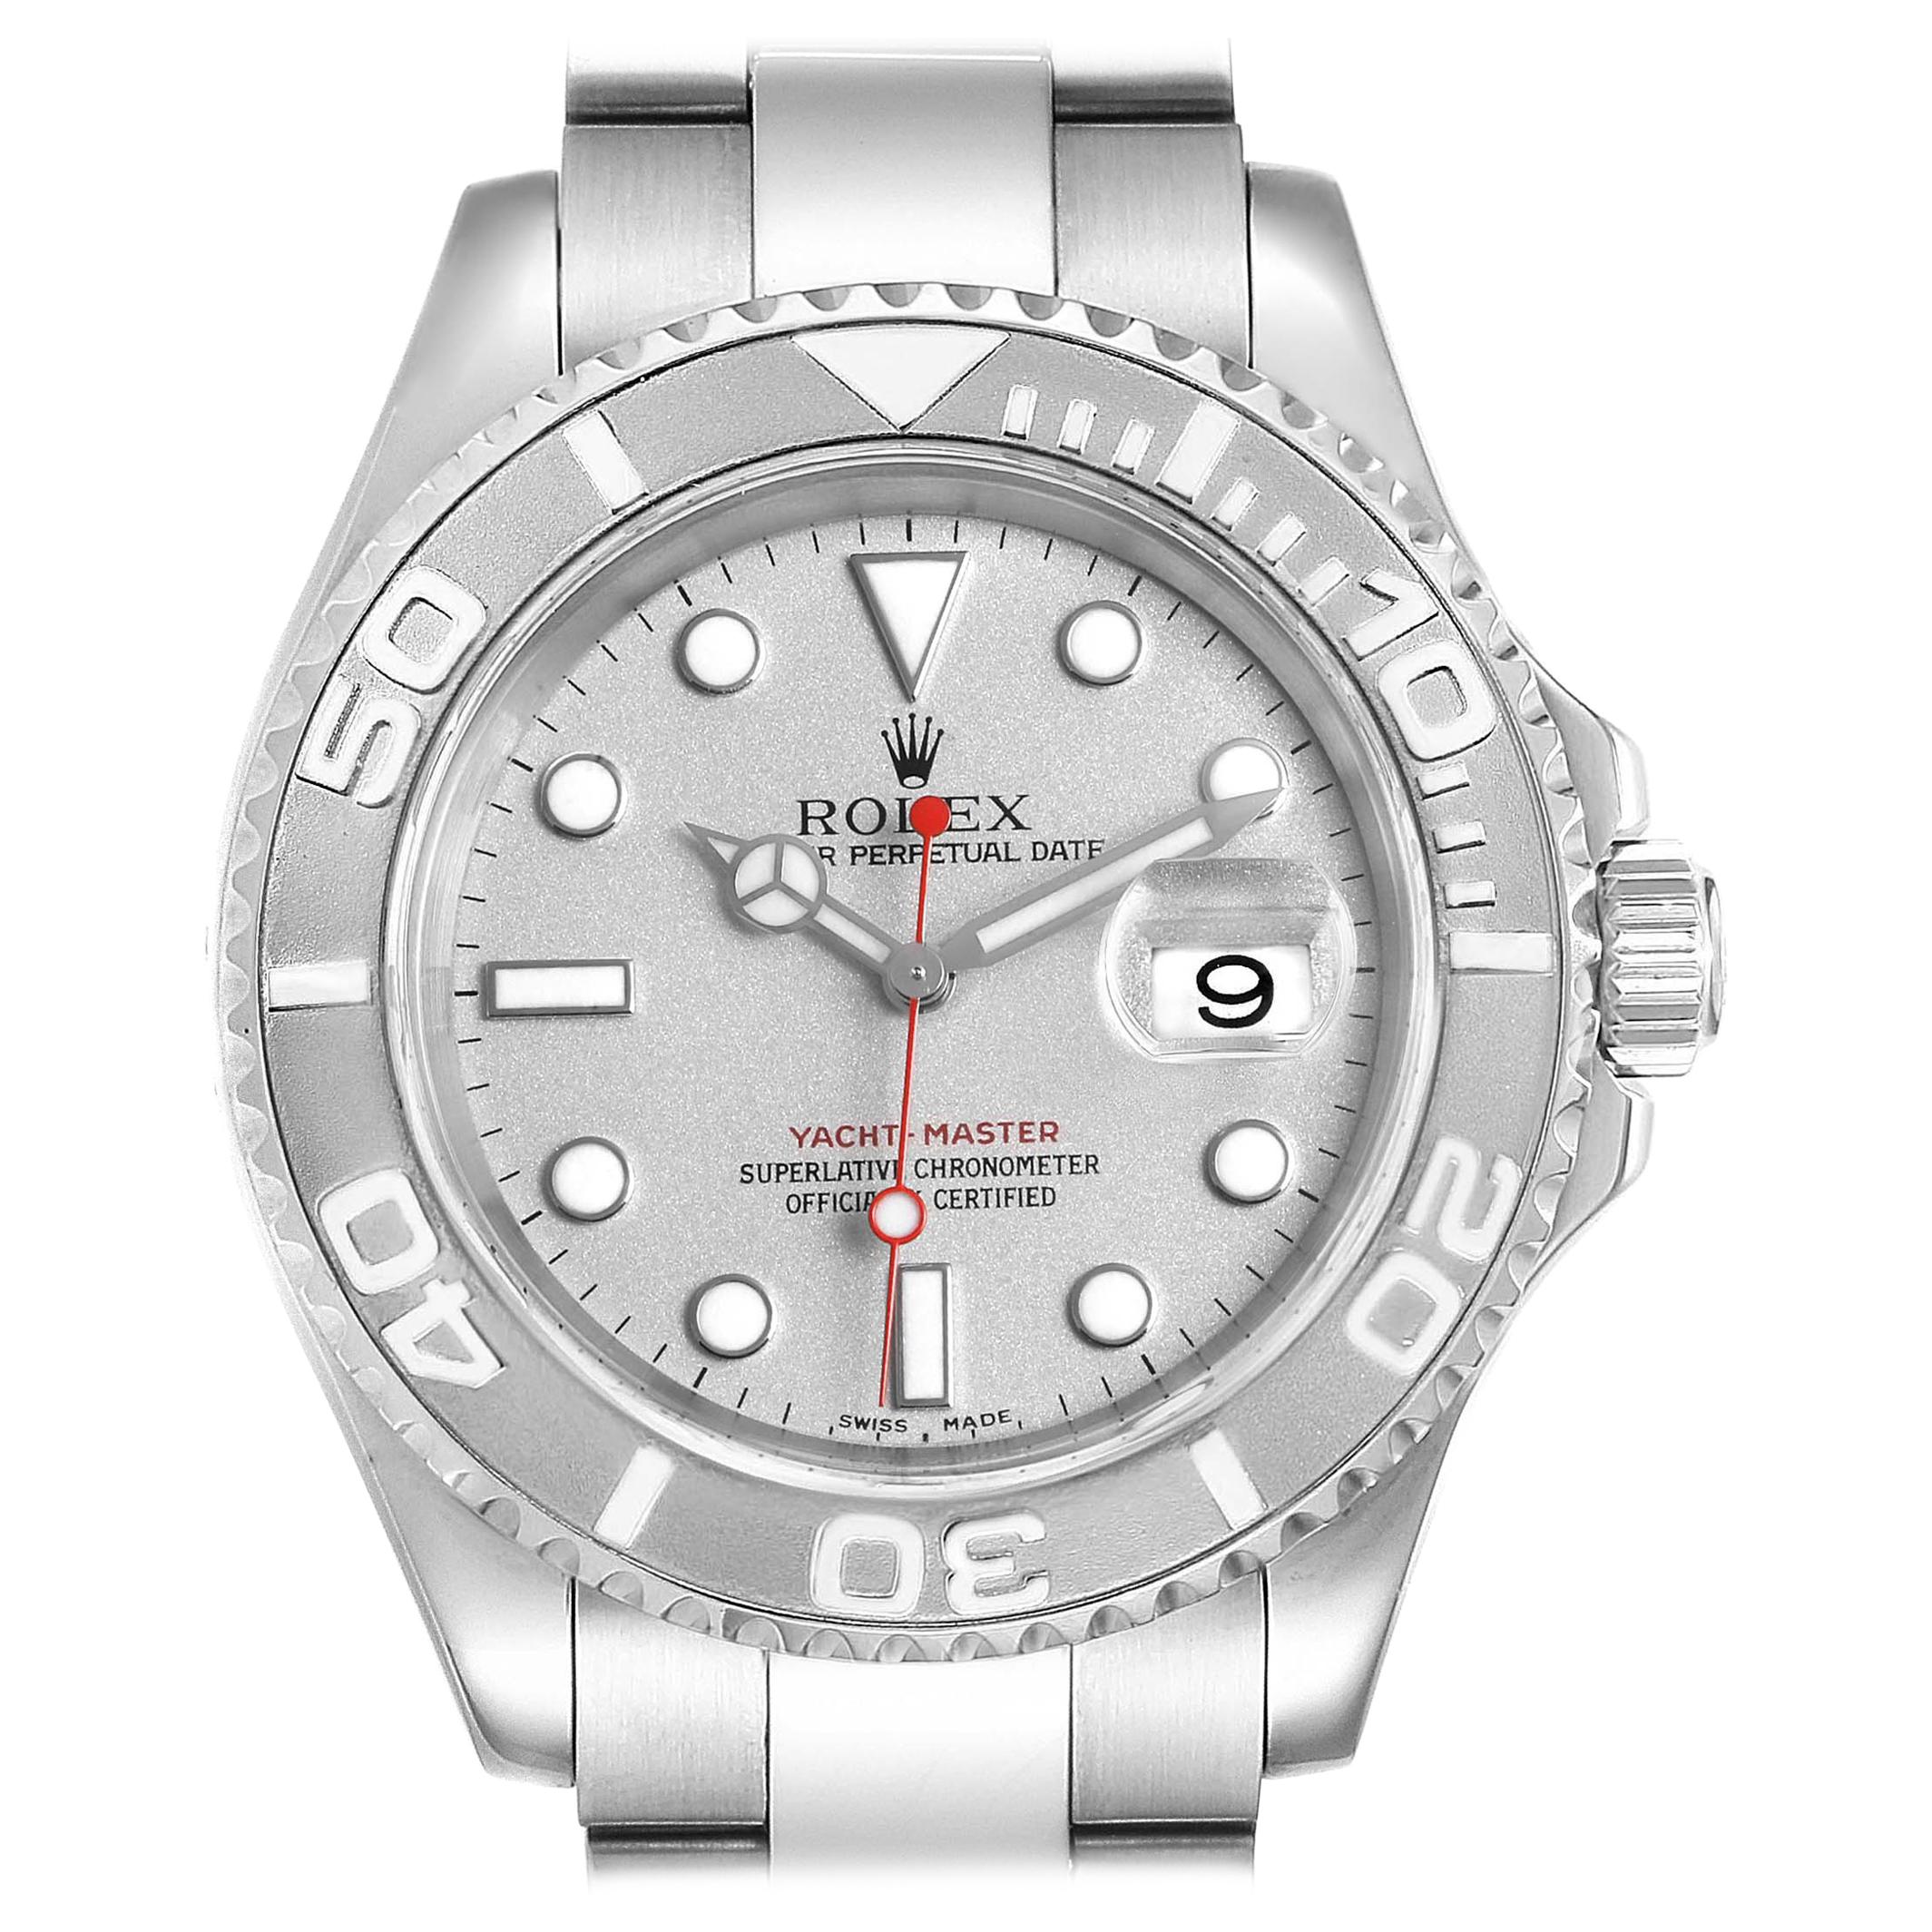 Rolex Yachtmaster Steel Platinum Men's Watch 16622 Box Papers For Sale